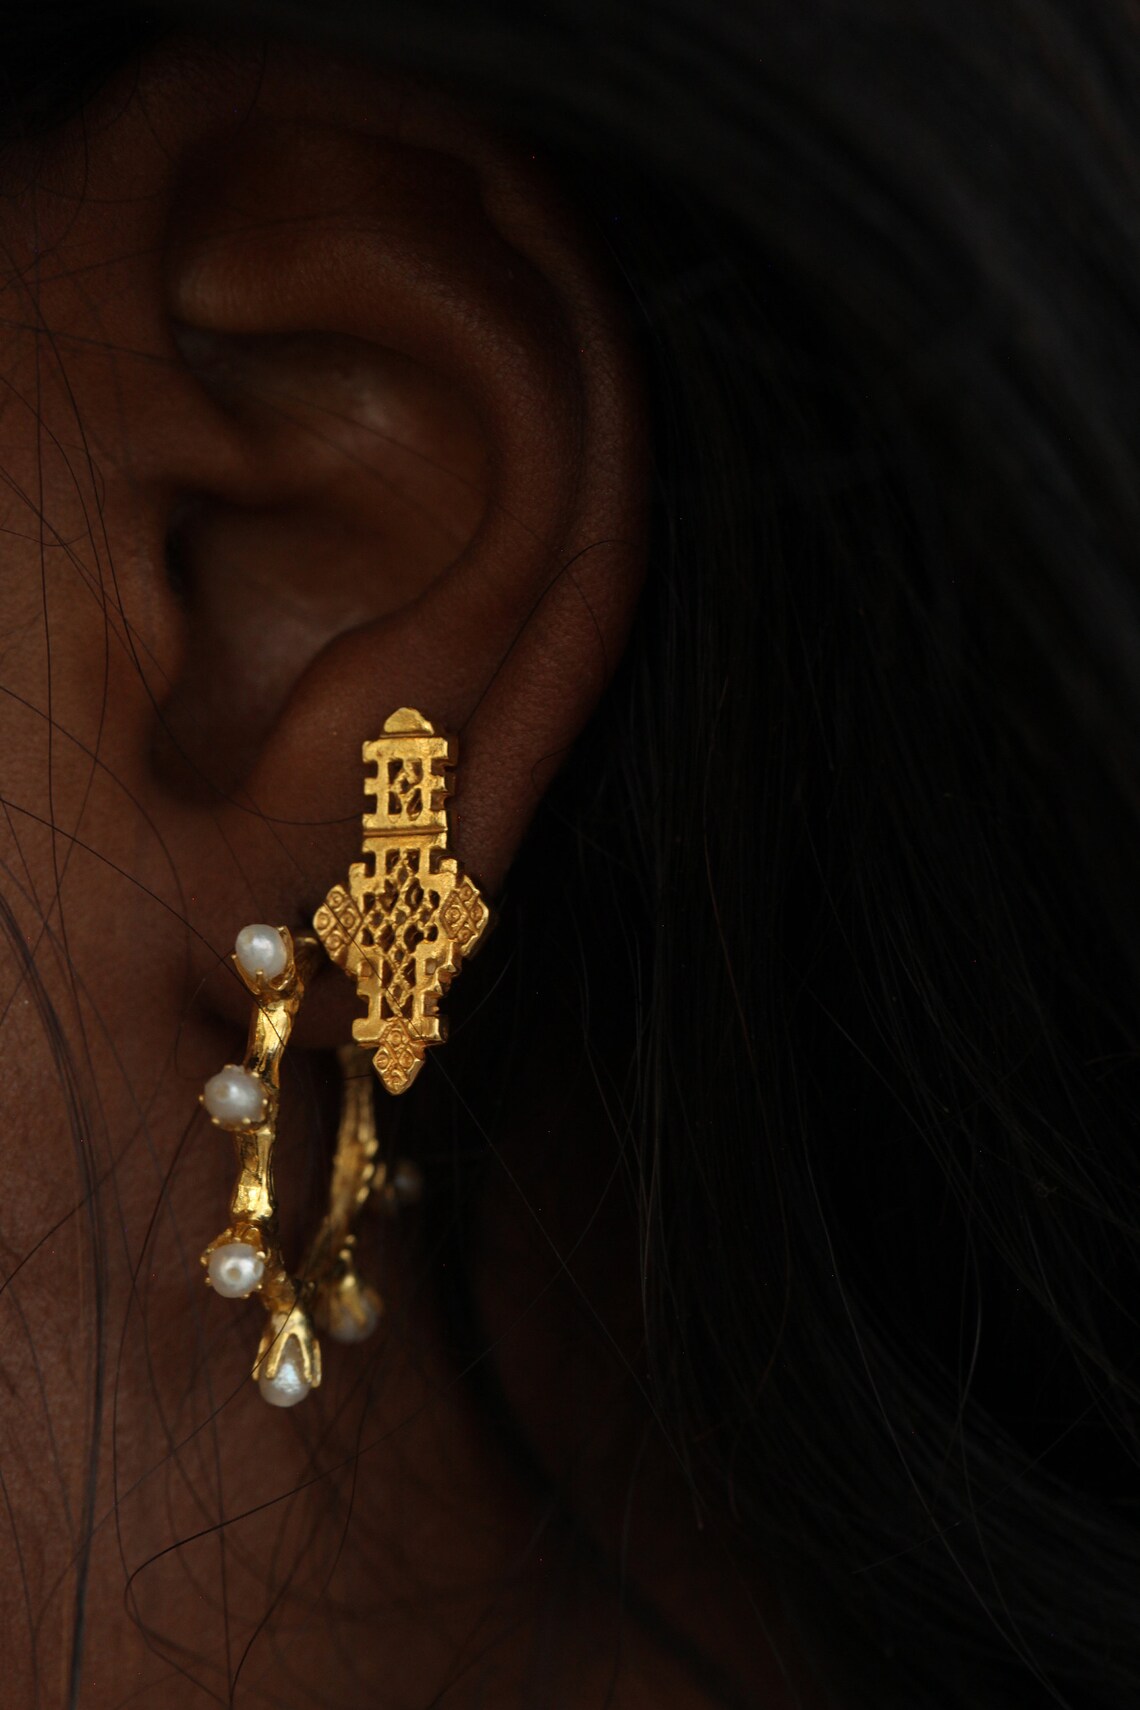 A close up shot of a model's ears wearing two earrings, one a gold hoop with pearls, and another large gold stud by Etsy shop Omi Woods.